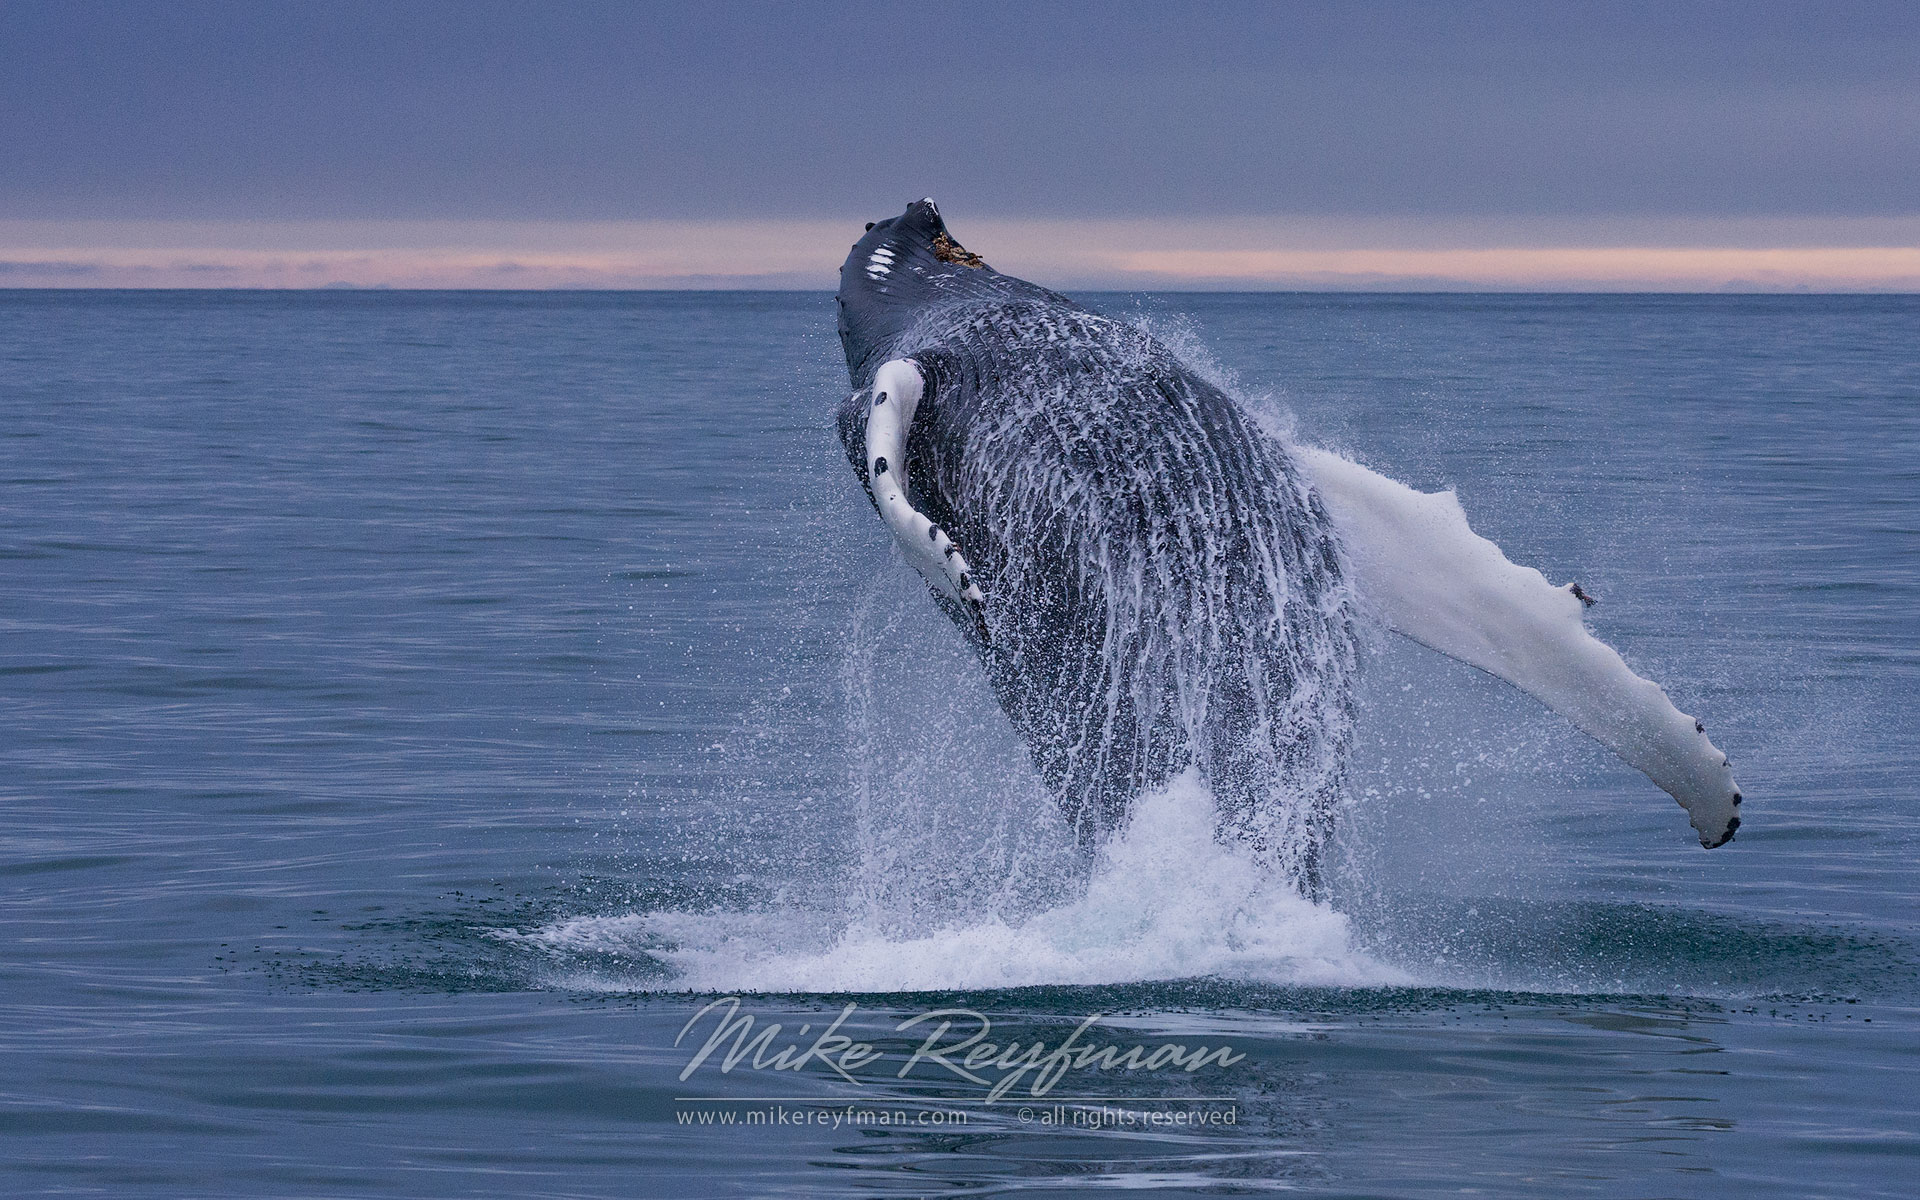 Humback Whale (Megaptera novaeangeliae) breaching (jumping out of the water) near Spitsbergen, Svalbard. - Wildlife-Svalbard-Spitsbergen-Norway - Mike Reyfman Photography